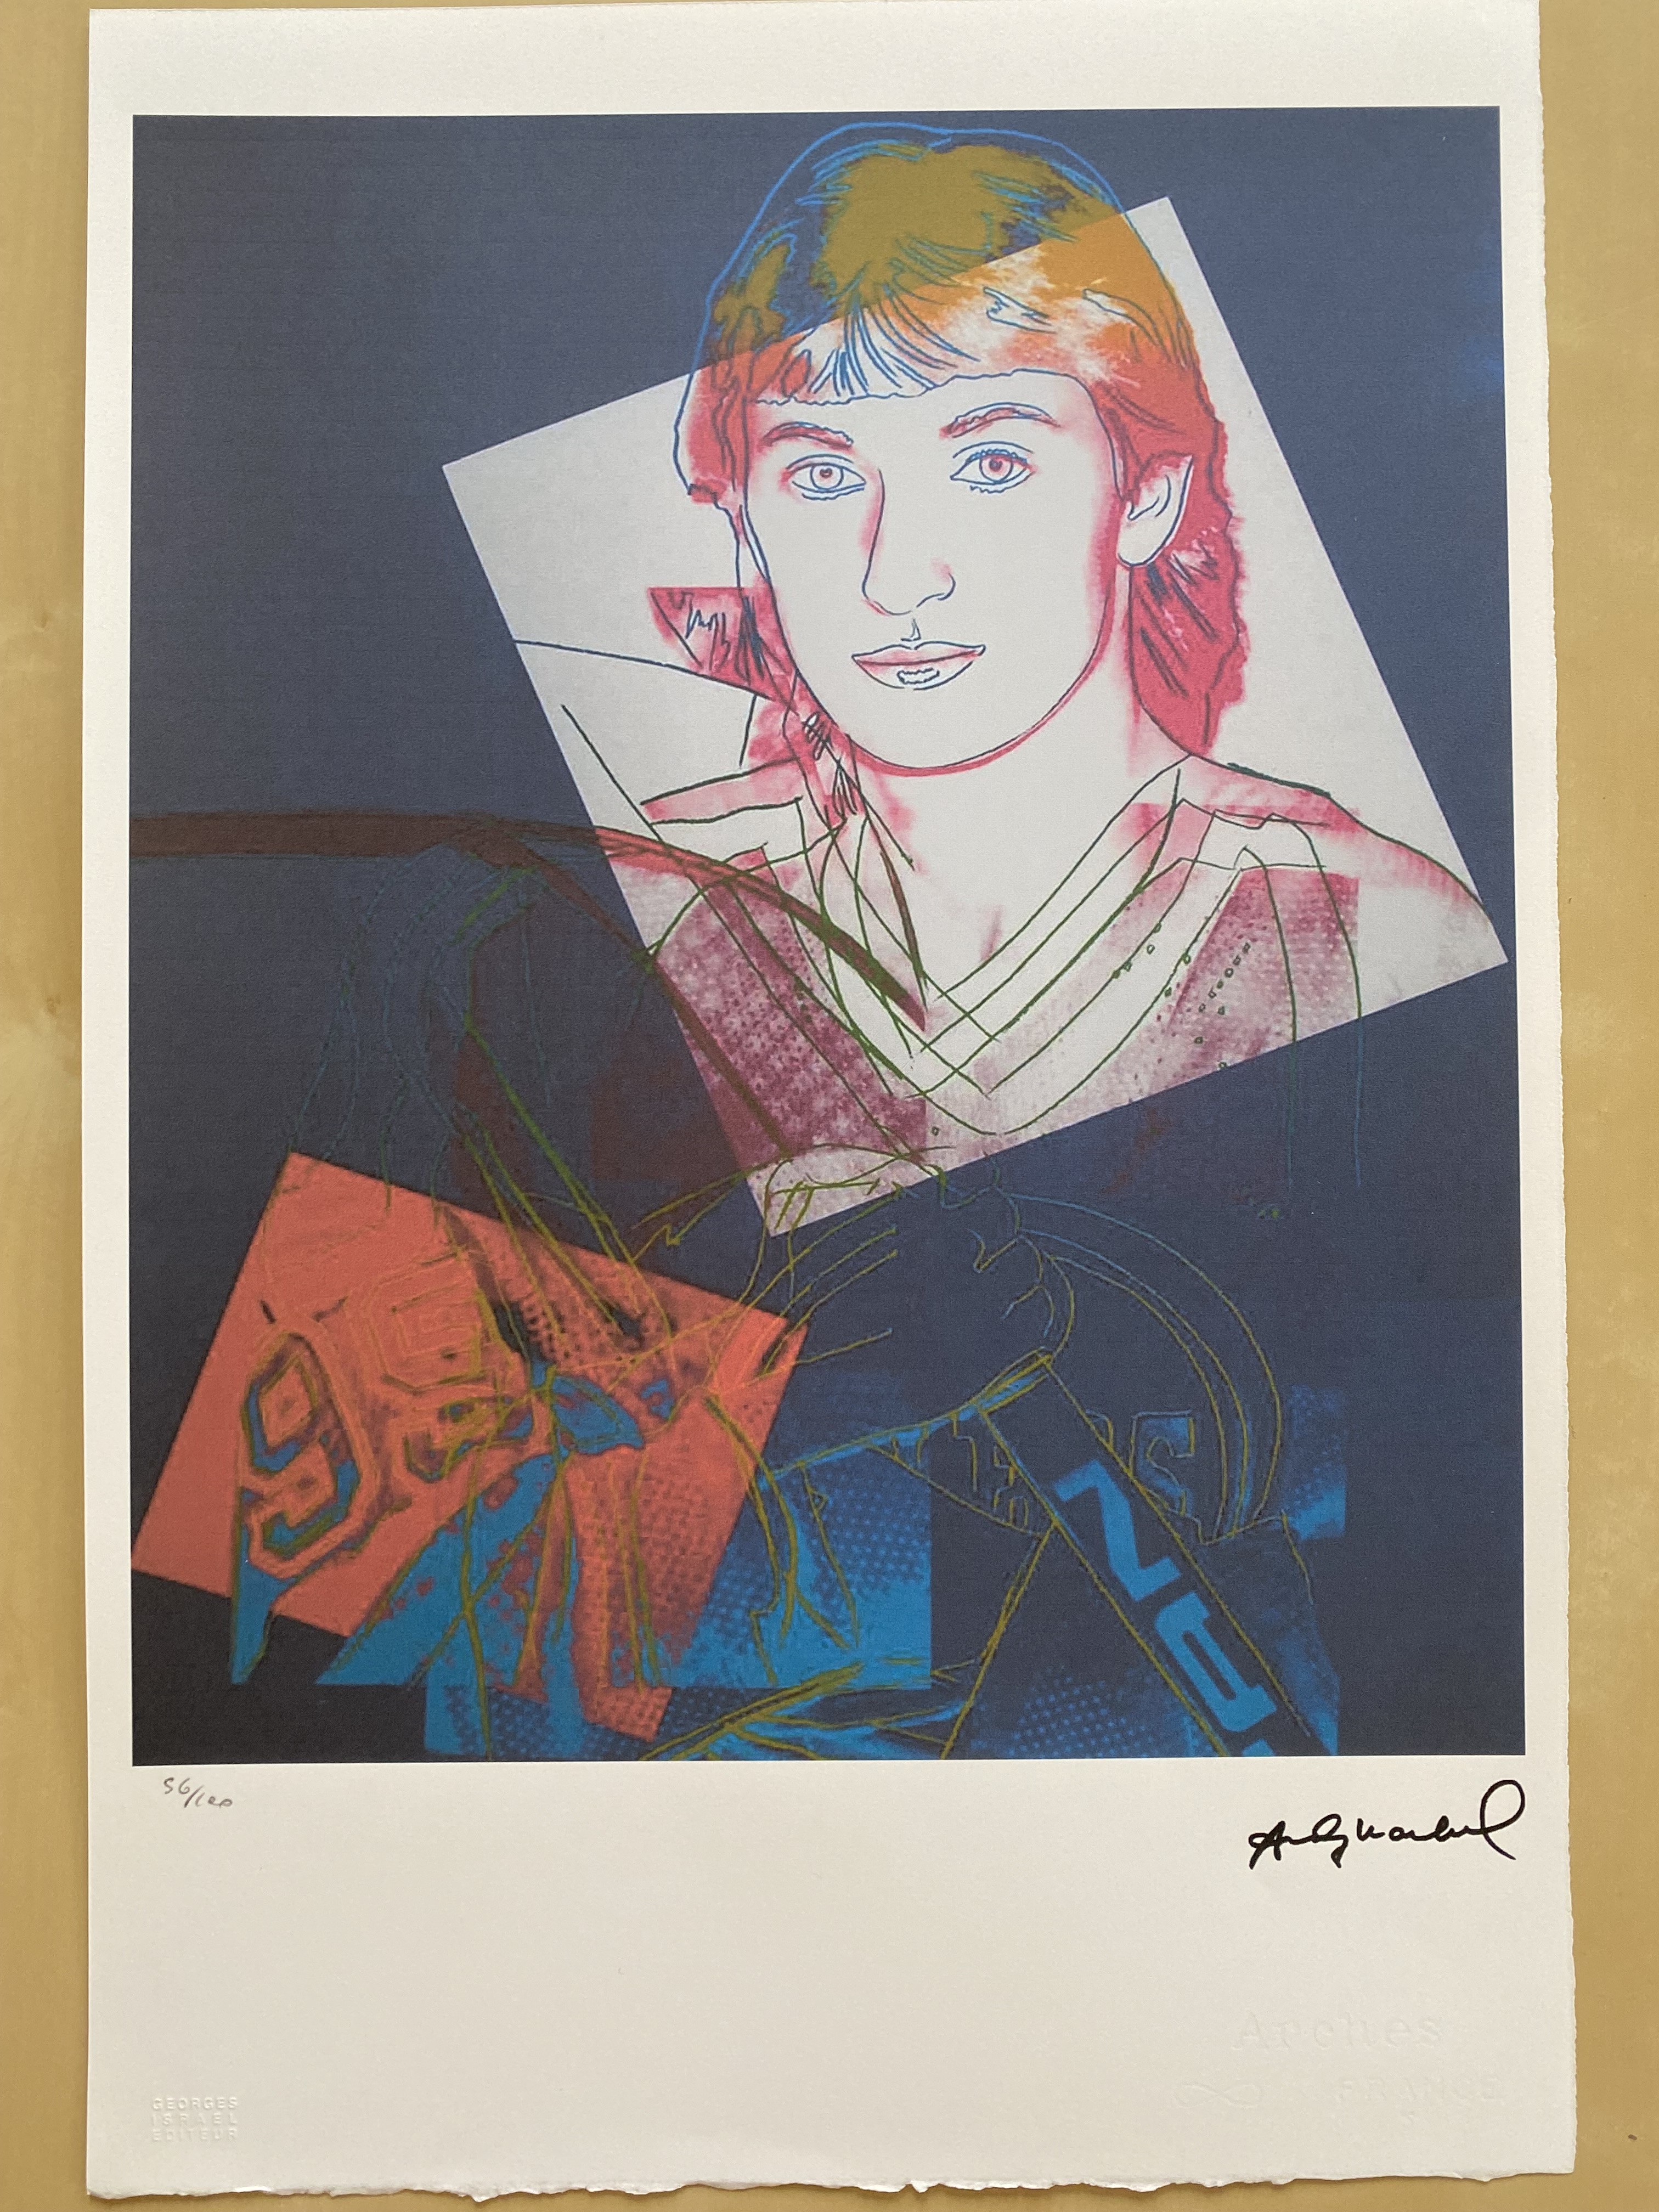 When Andy Warhol and Wayne Gretzky teamed up for a portrait